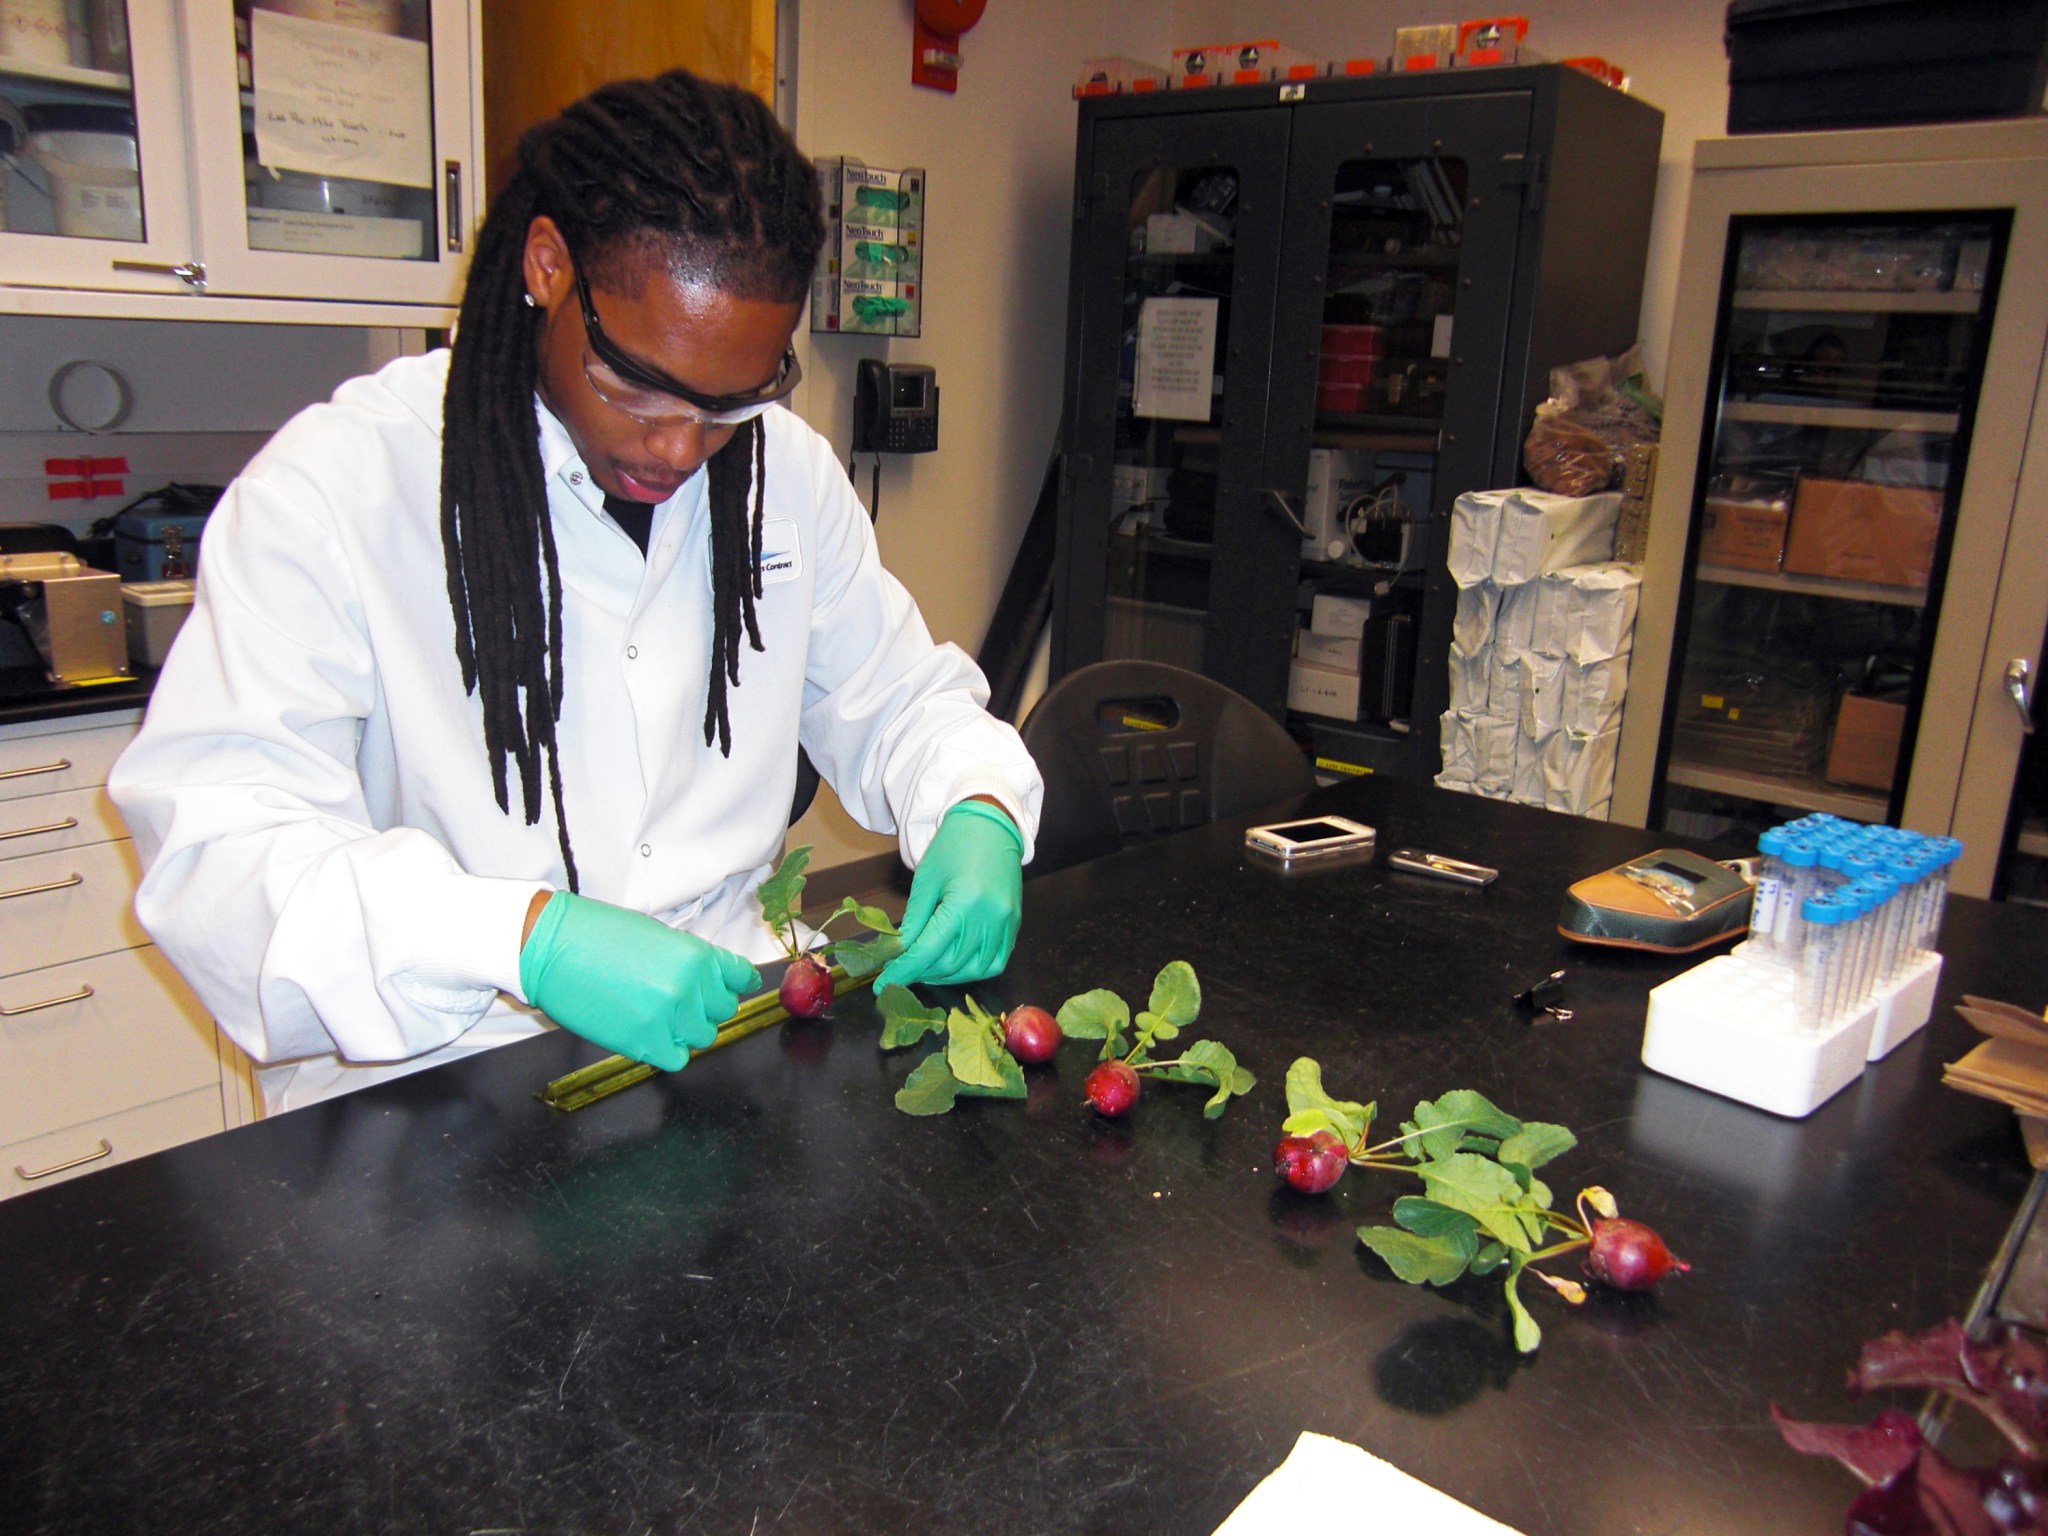 A plant biologist measures radish plants in a lab